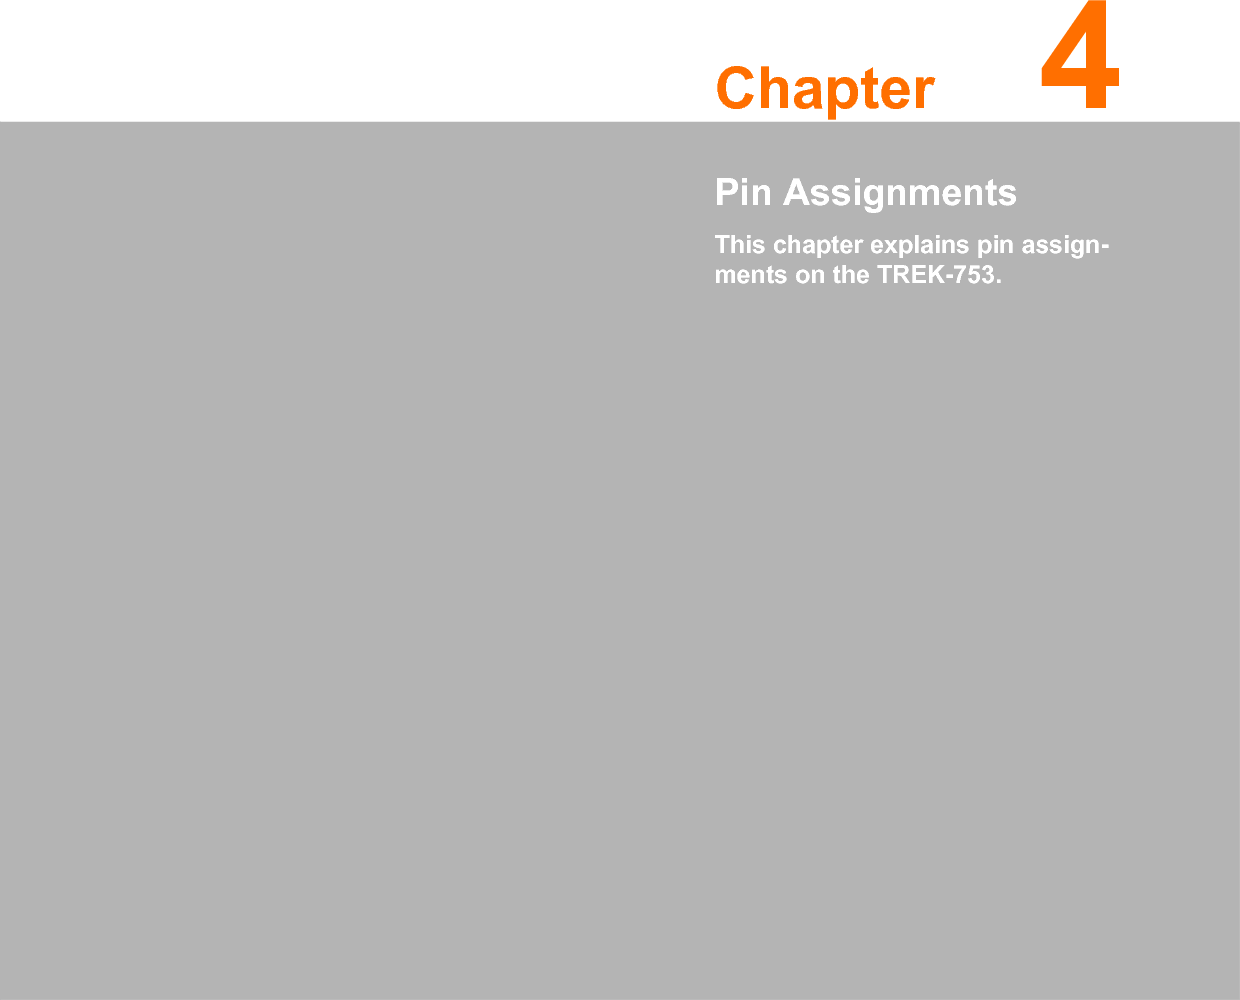 Chapter 44Pin AssignmentsThis chapter explains pin assign-ments on the TREK-753.